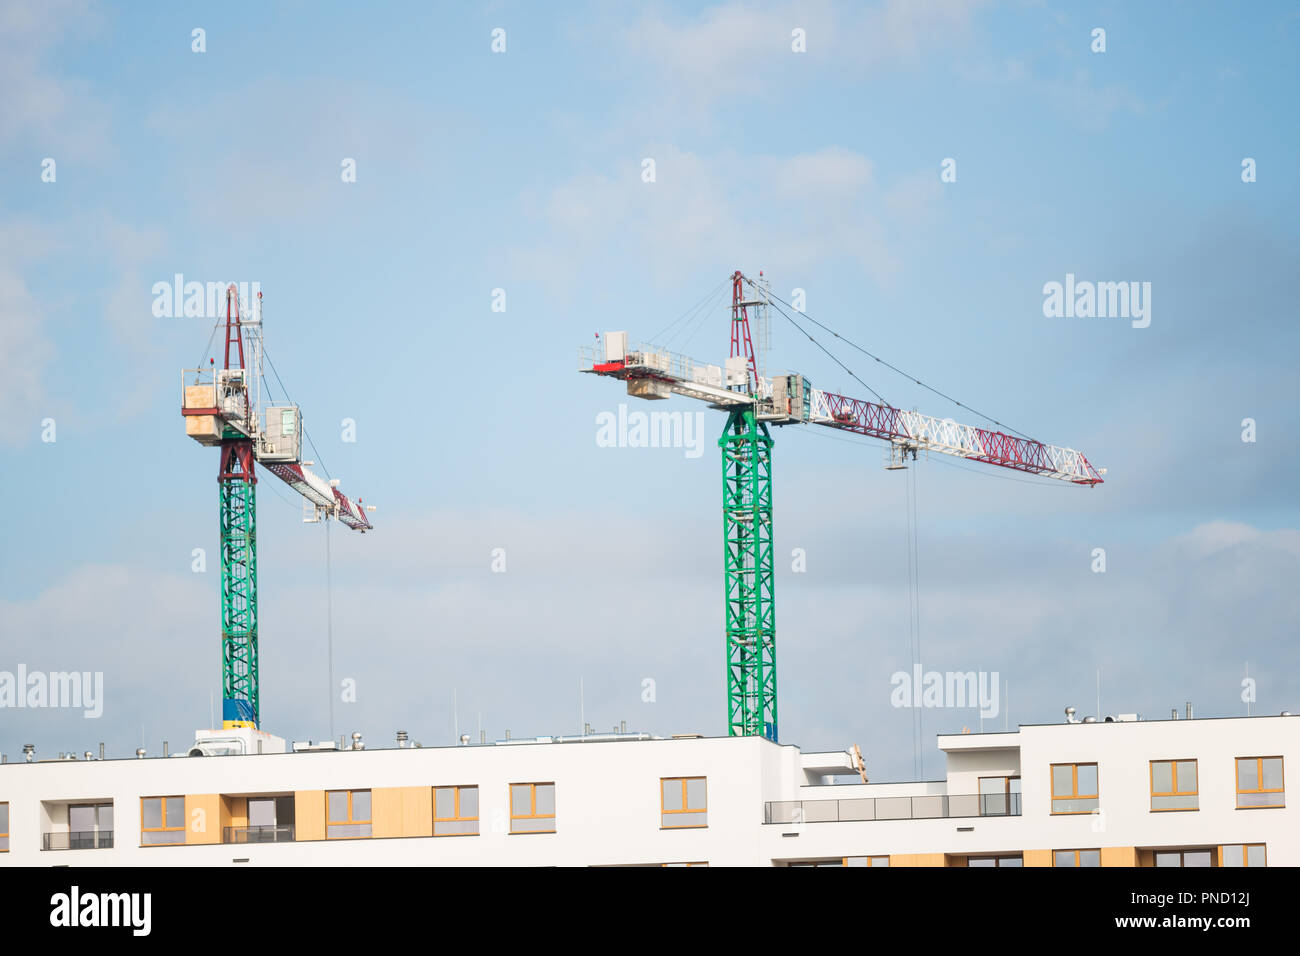 two cranes on the construction site. new buildings are being built Stock Photo